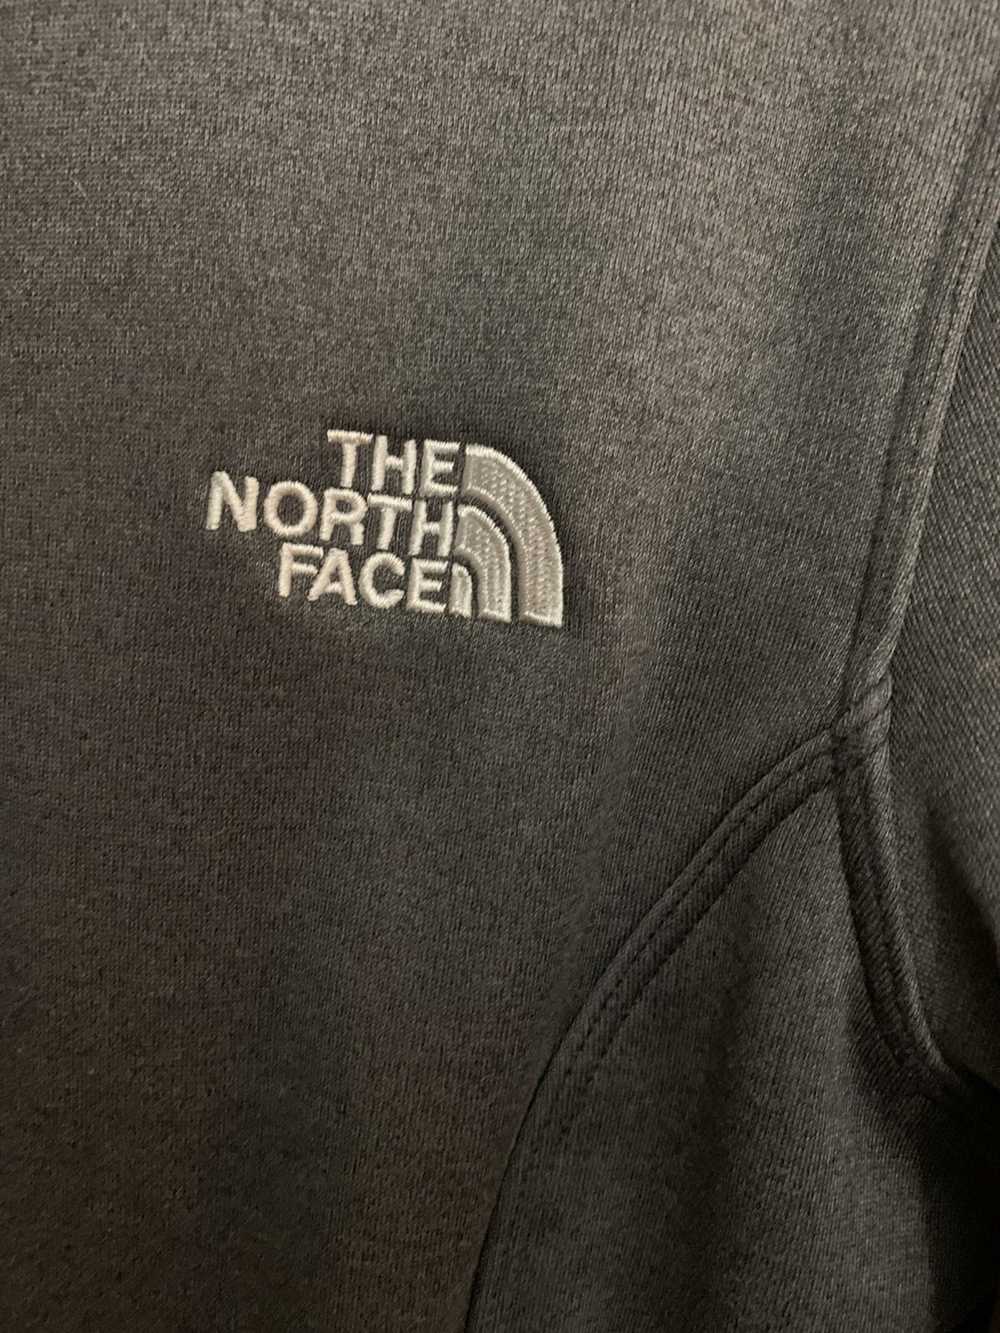 The North Face The North Face jacket - image 2